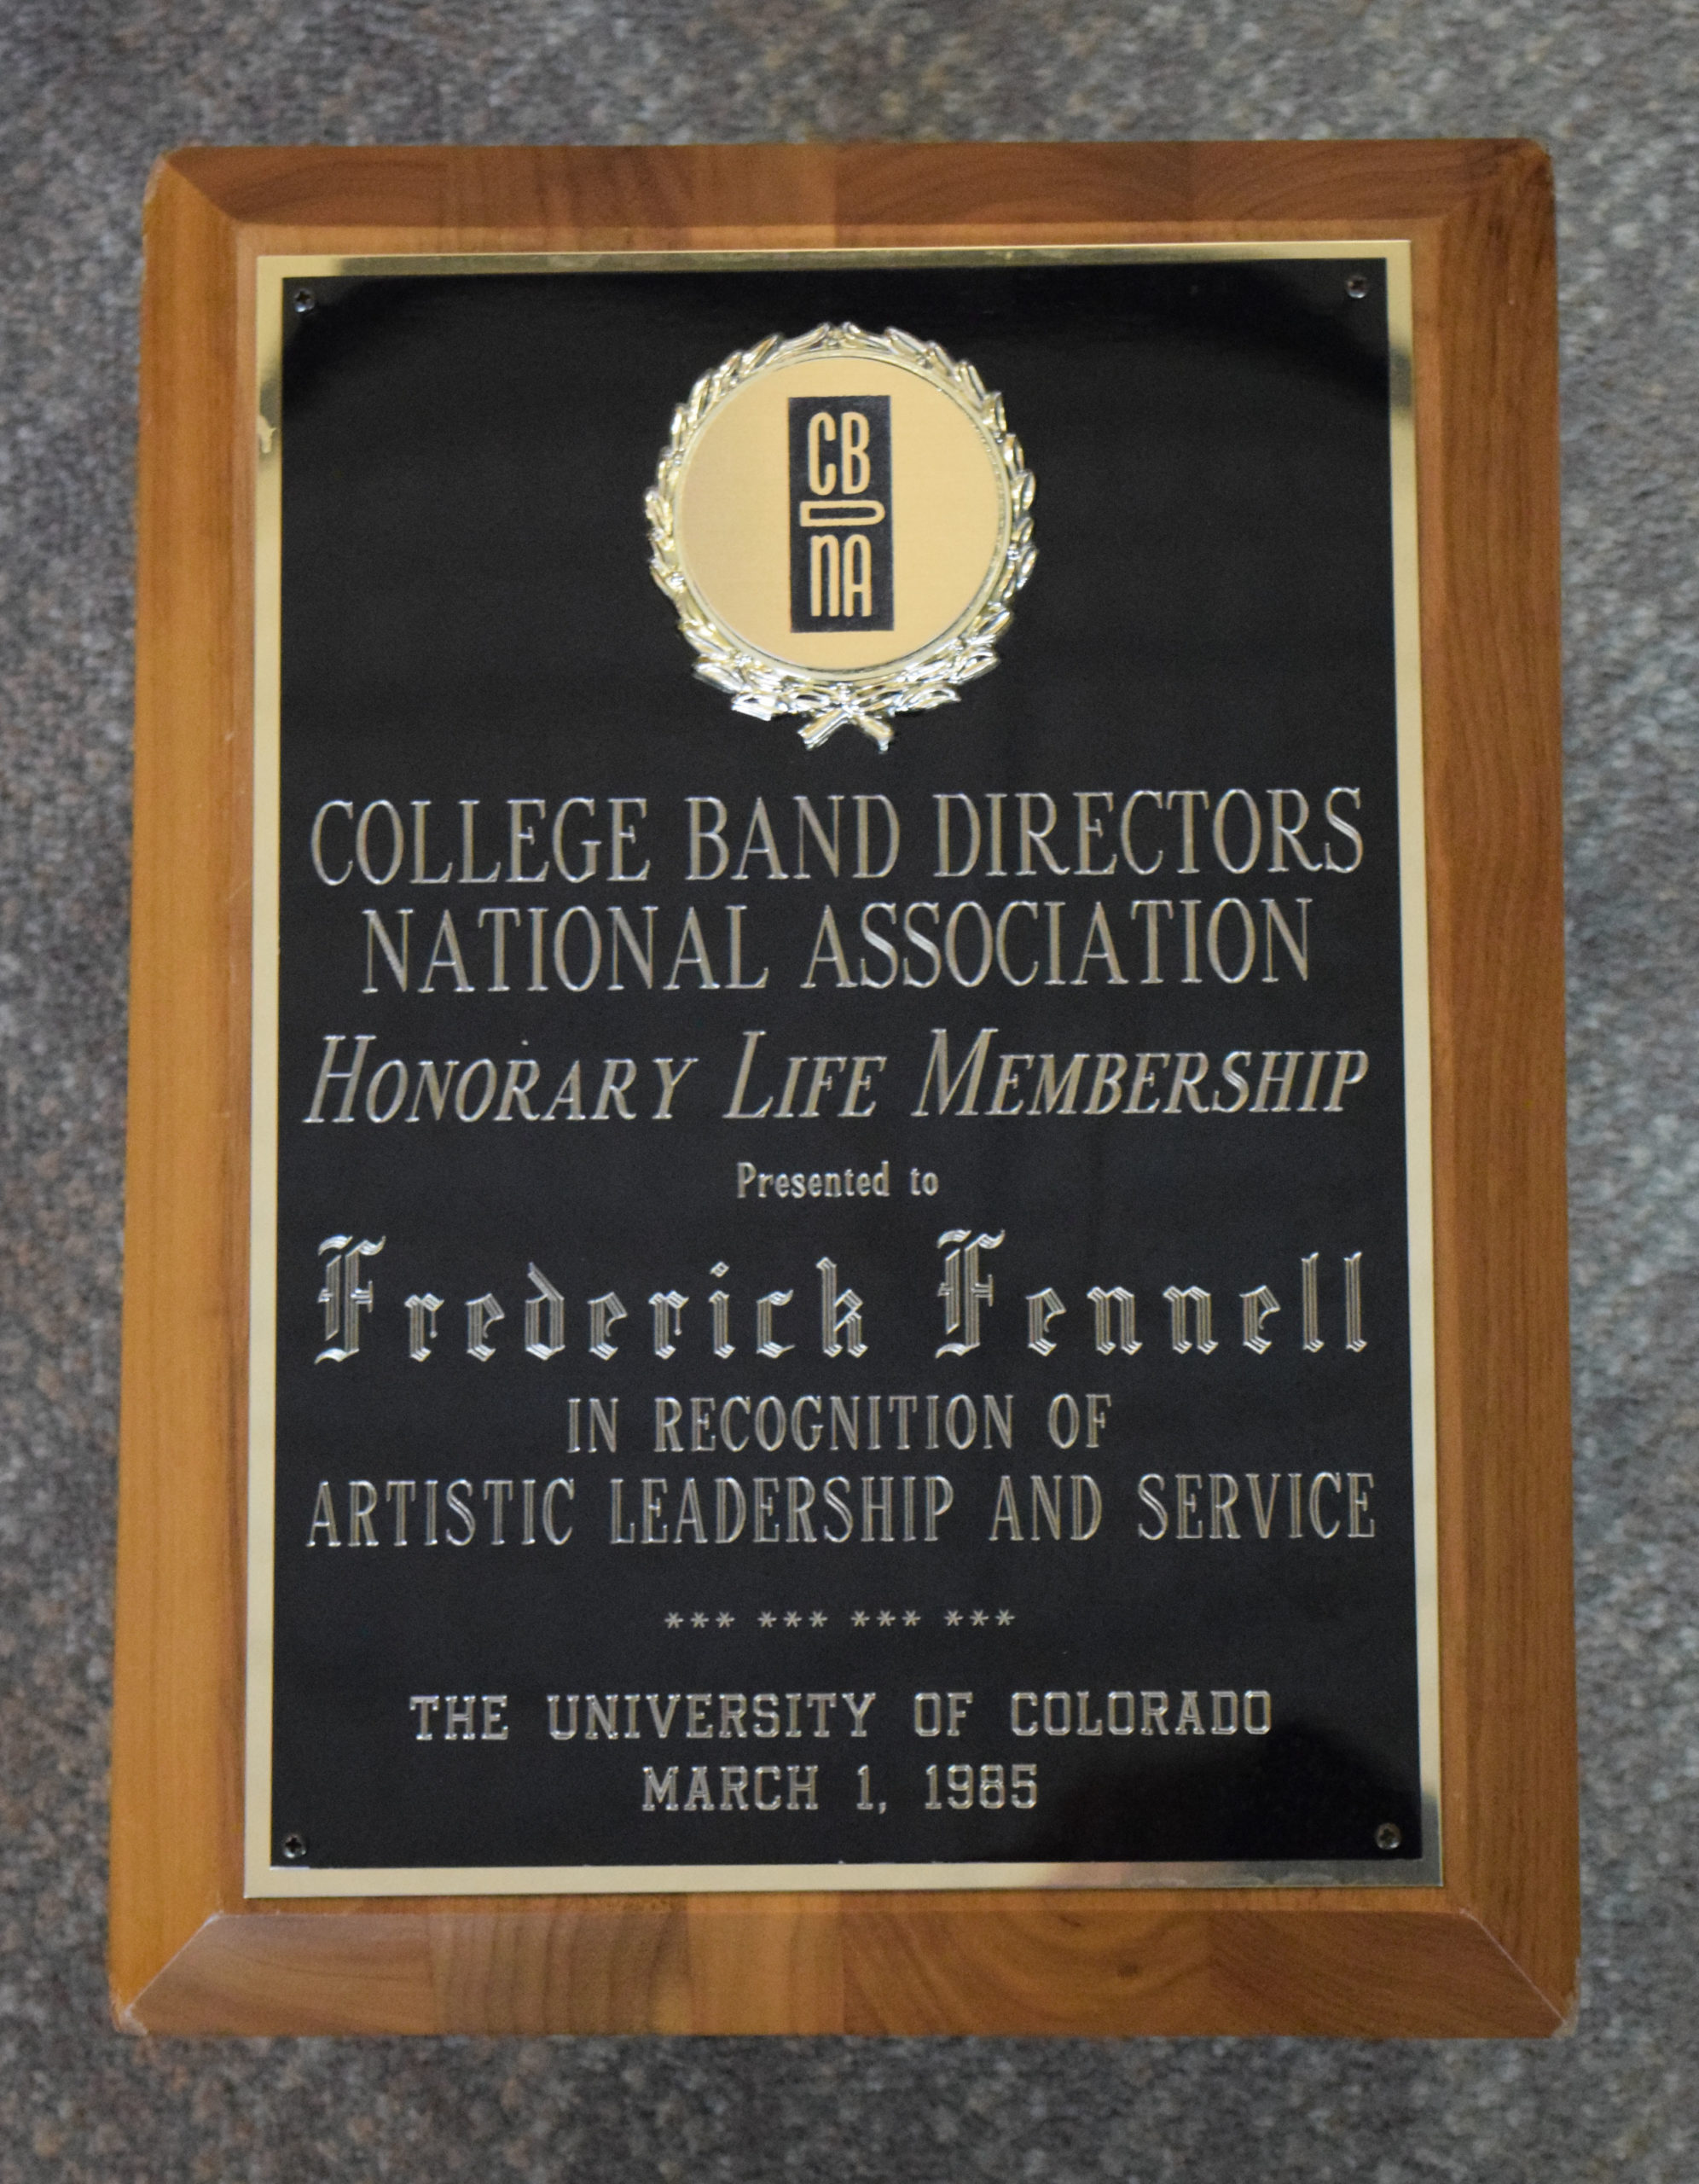 In 1985, Fennell was named Honorary Life Member of the College Band Directors National Association in formal recognition of his exemplary contributions to the welfare of college and university bands.